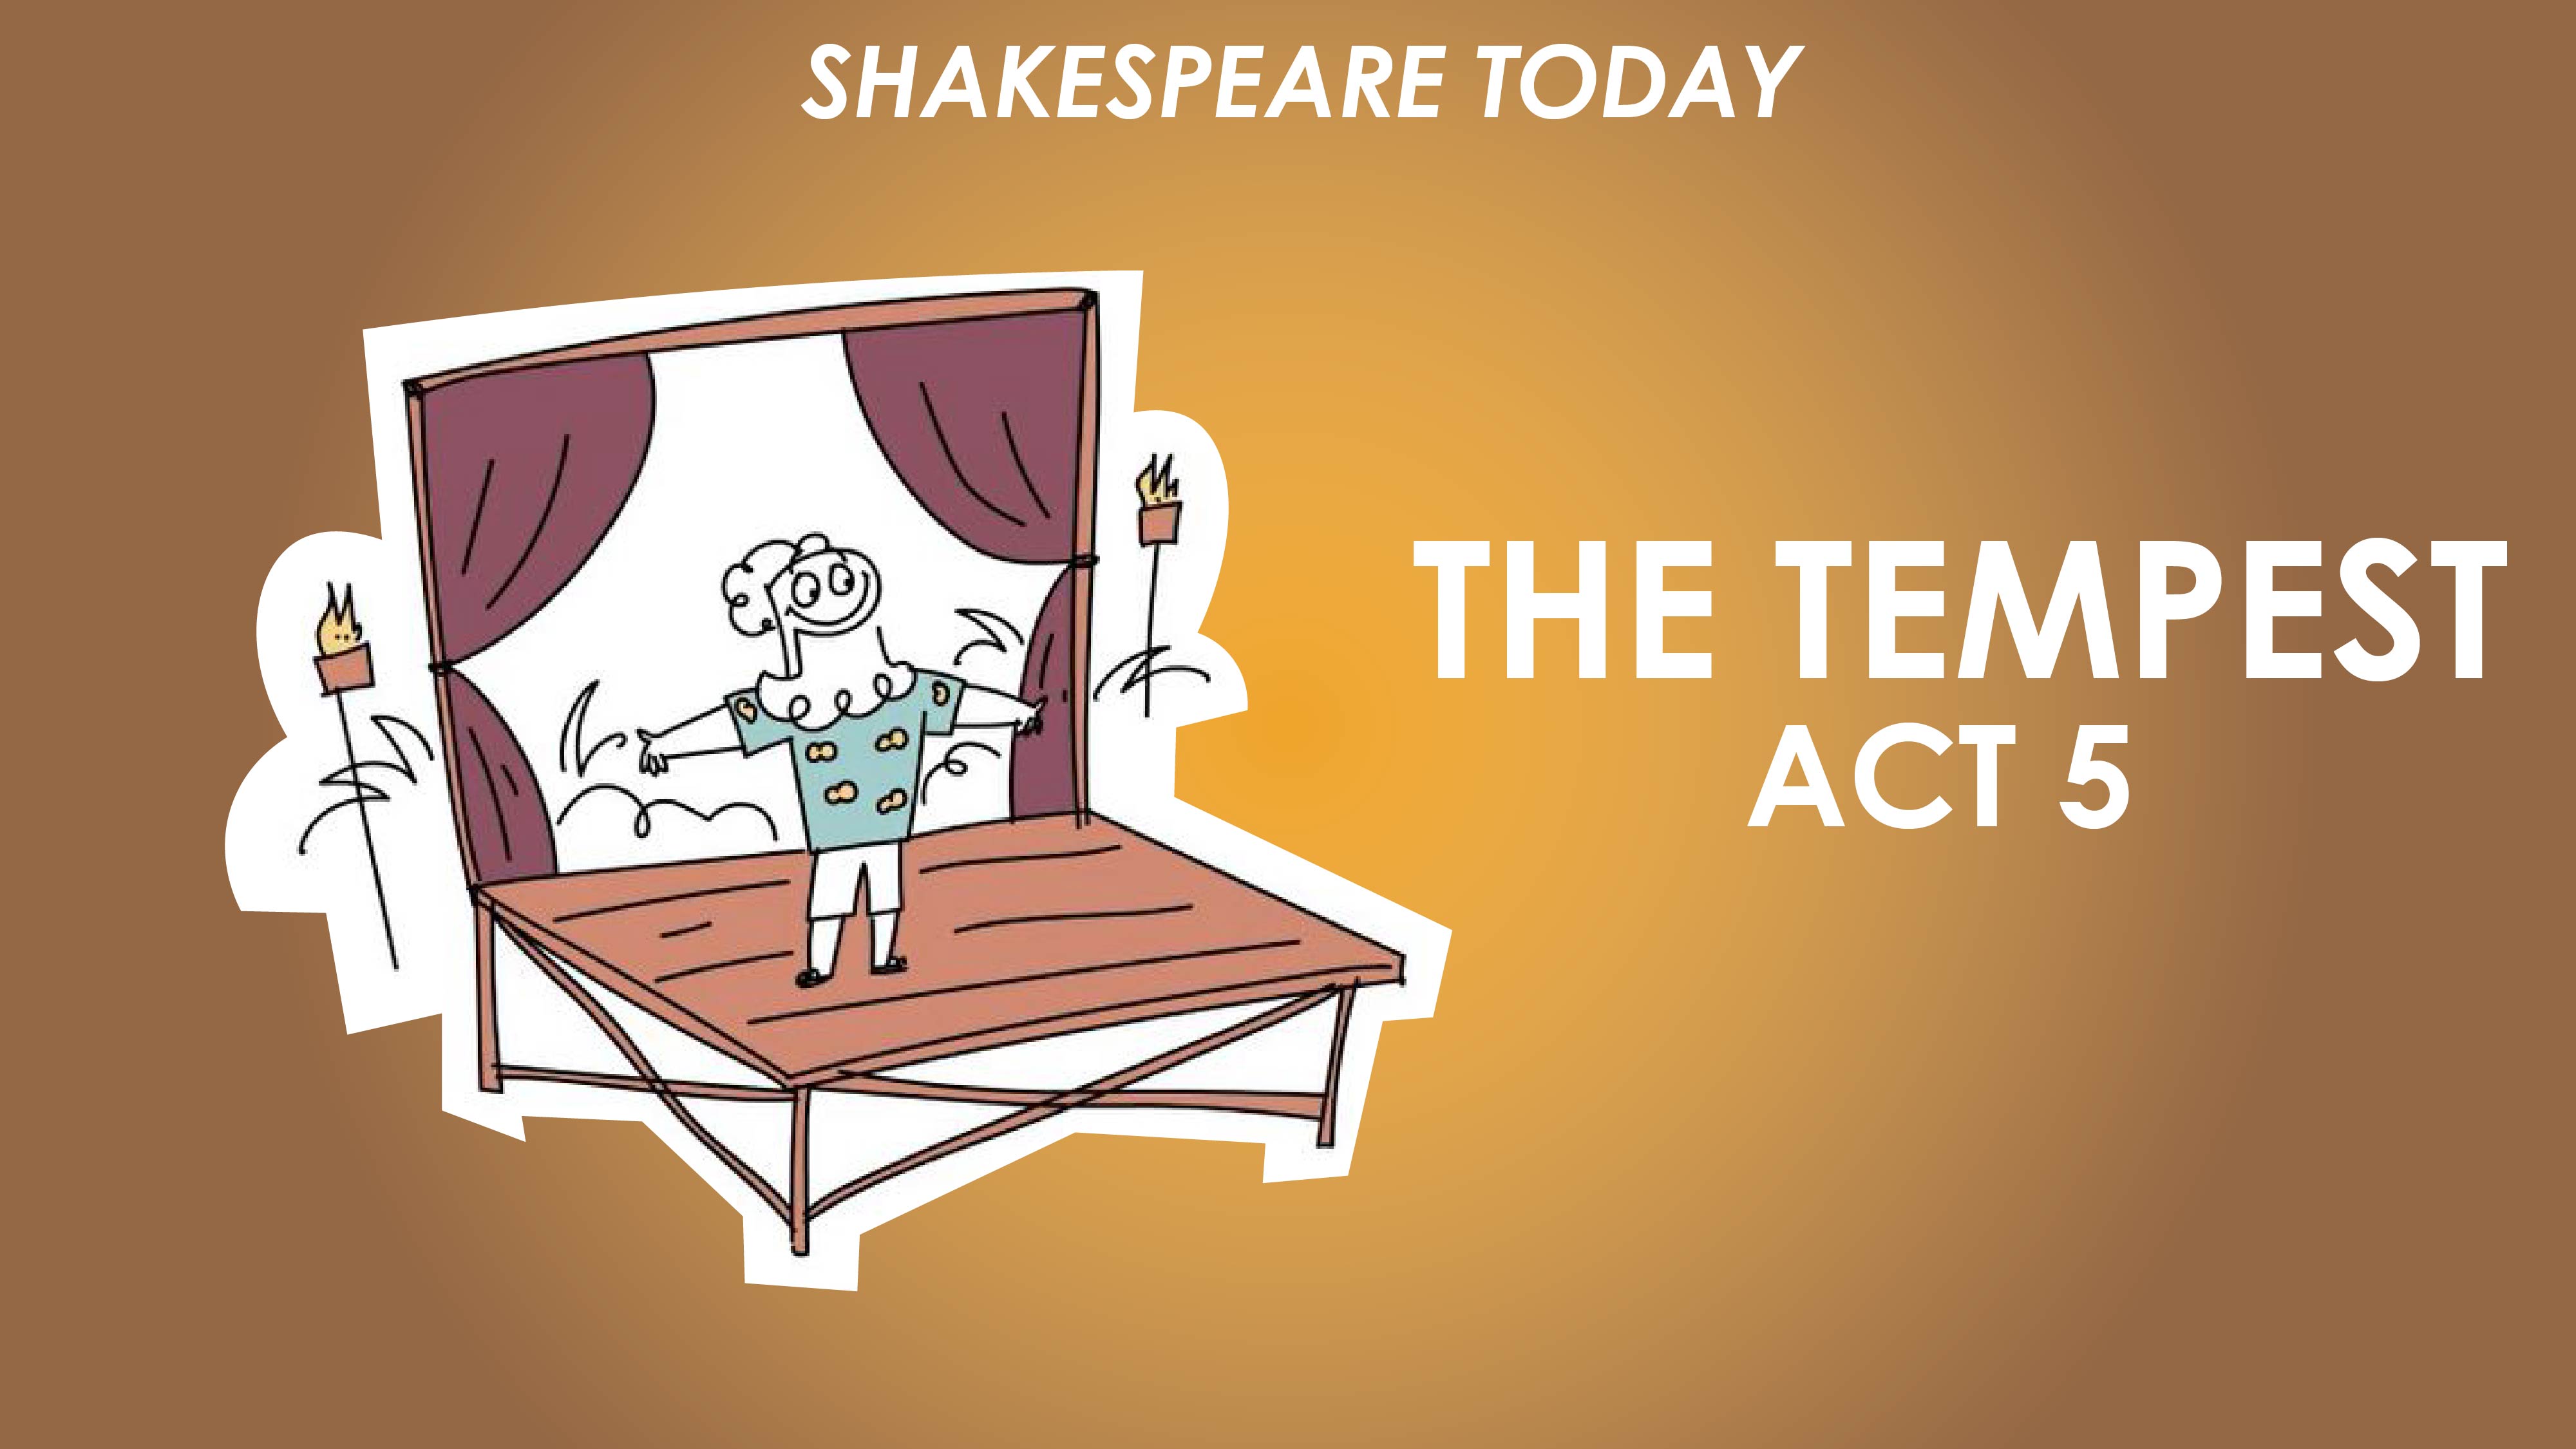 The Tempest Act 5 Summary - Shakespeare Today Series